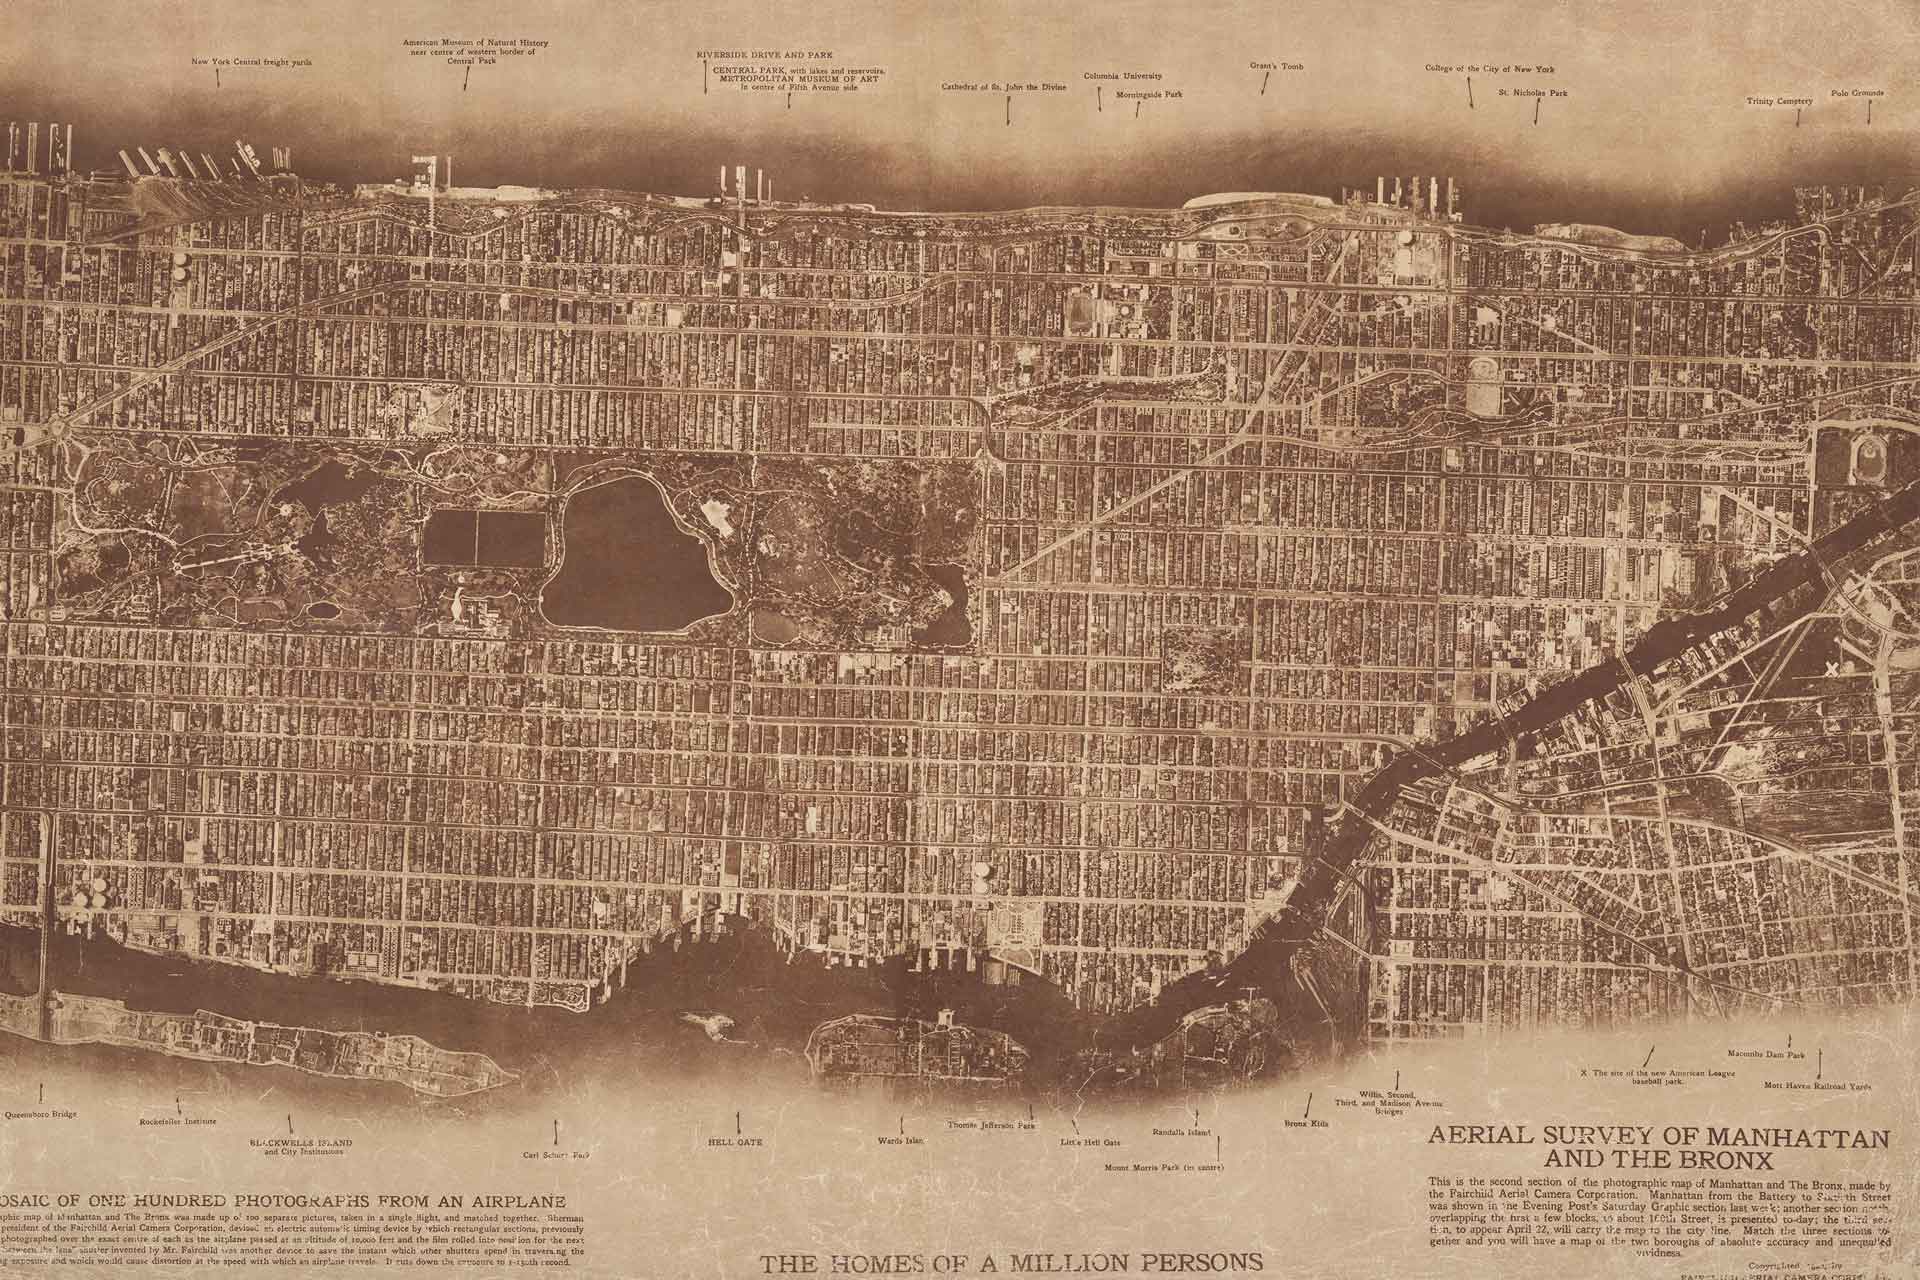 A wallpaper of a vintage map of New York City on old brown paper. Cara Saven Wall Design